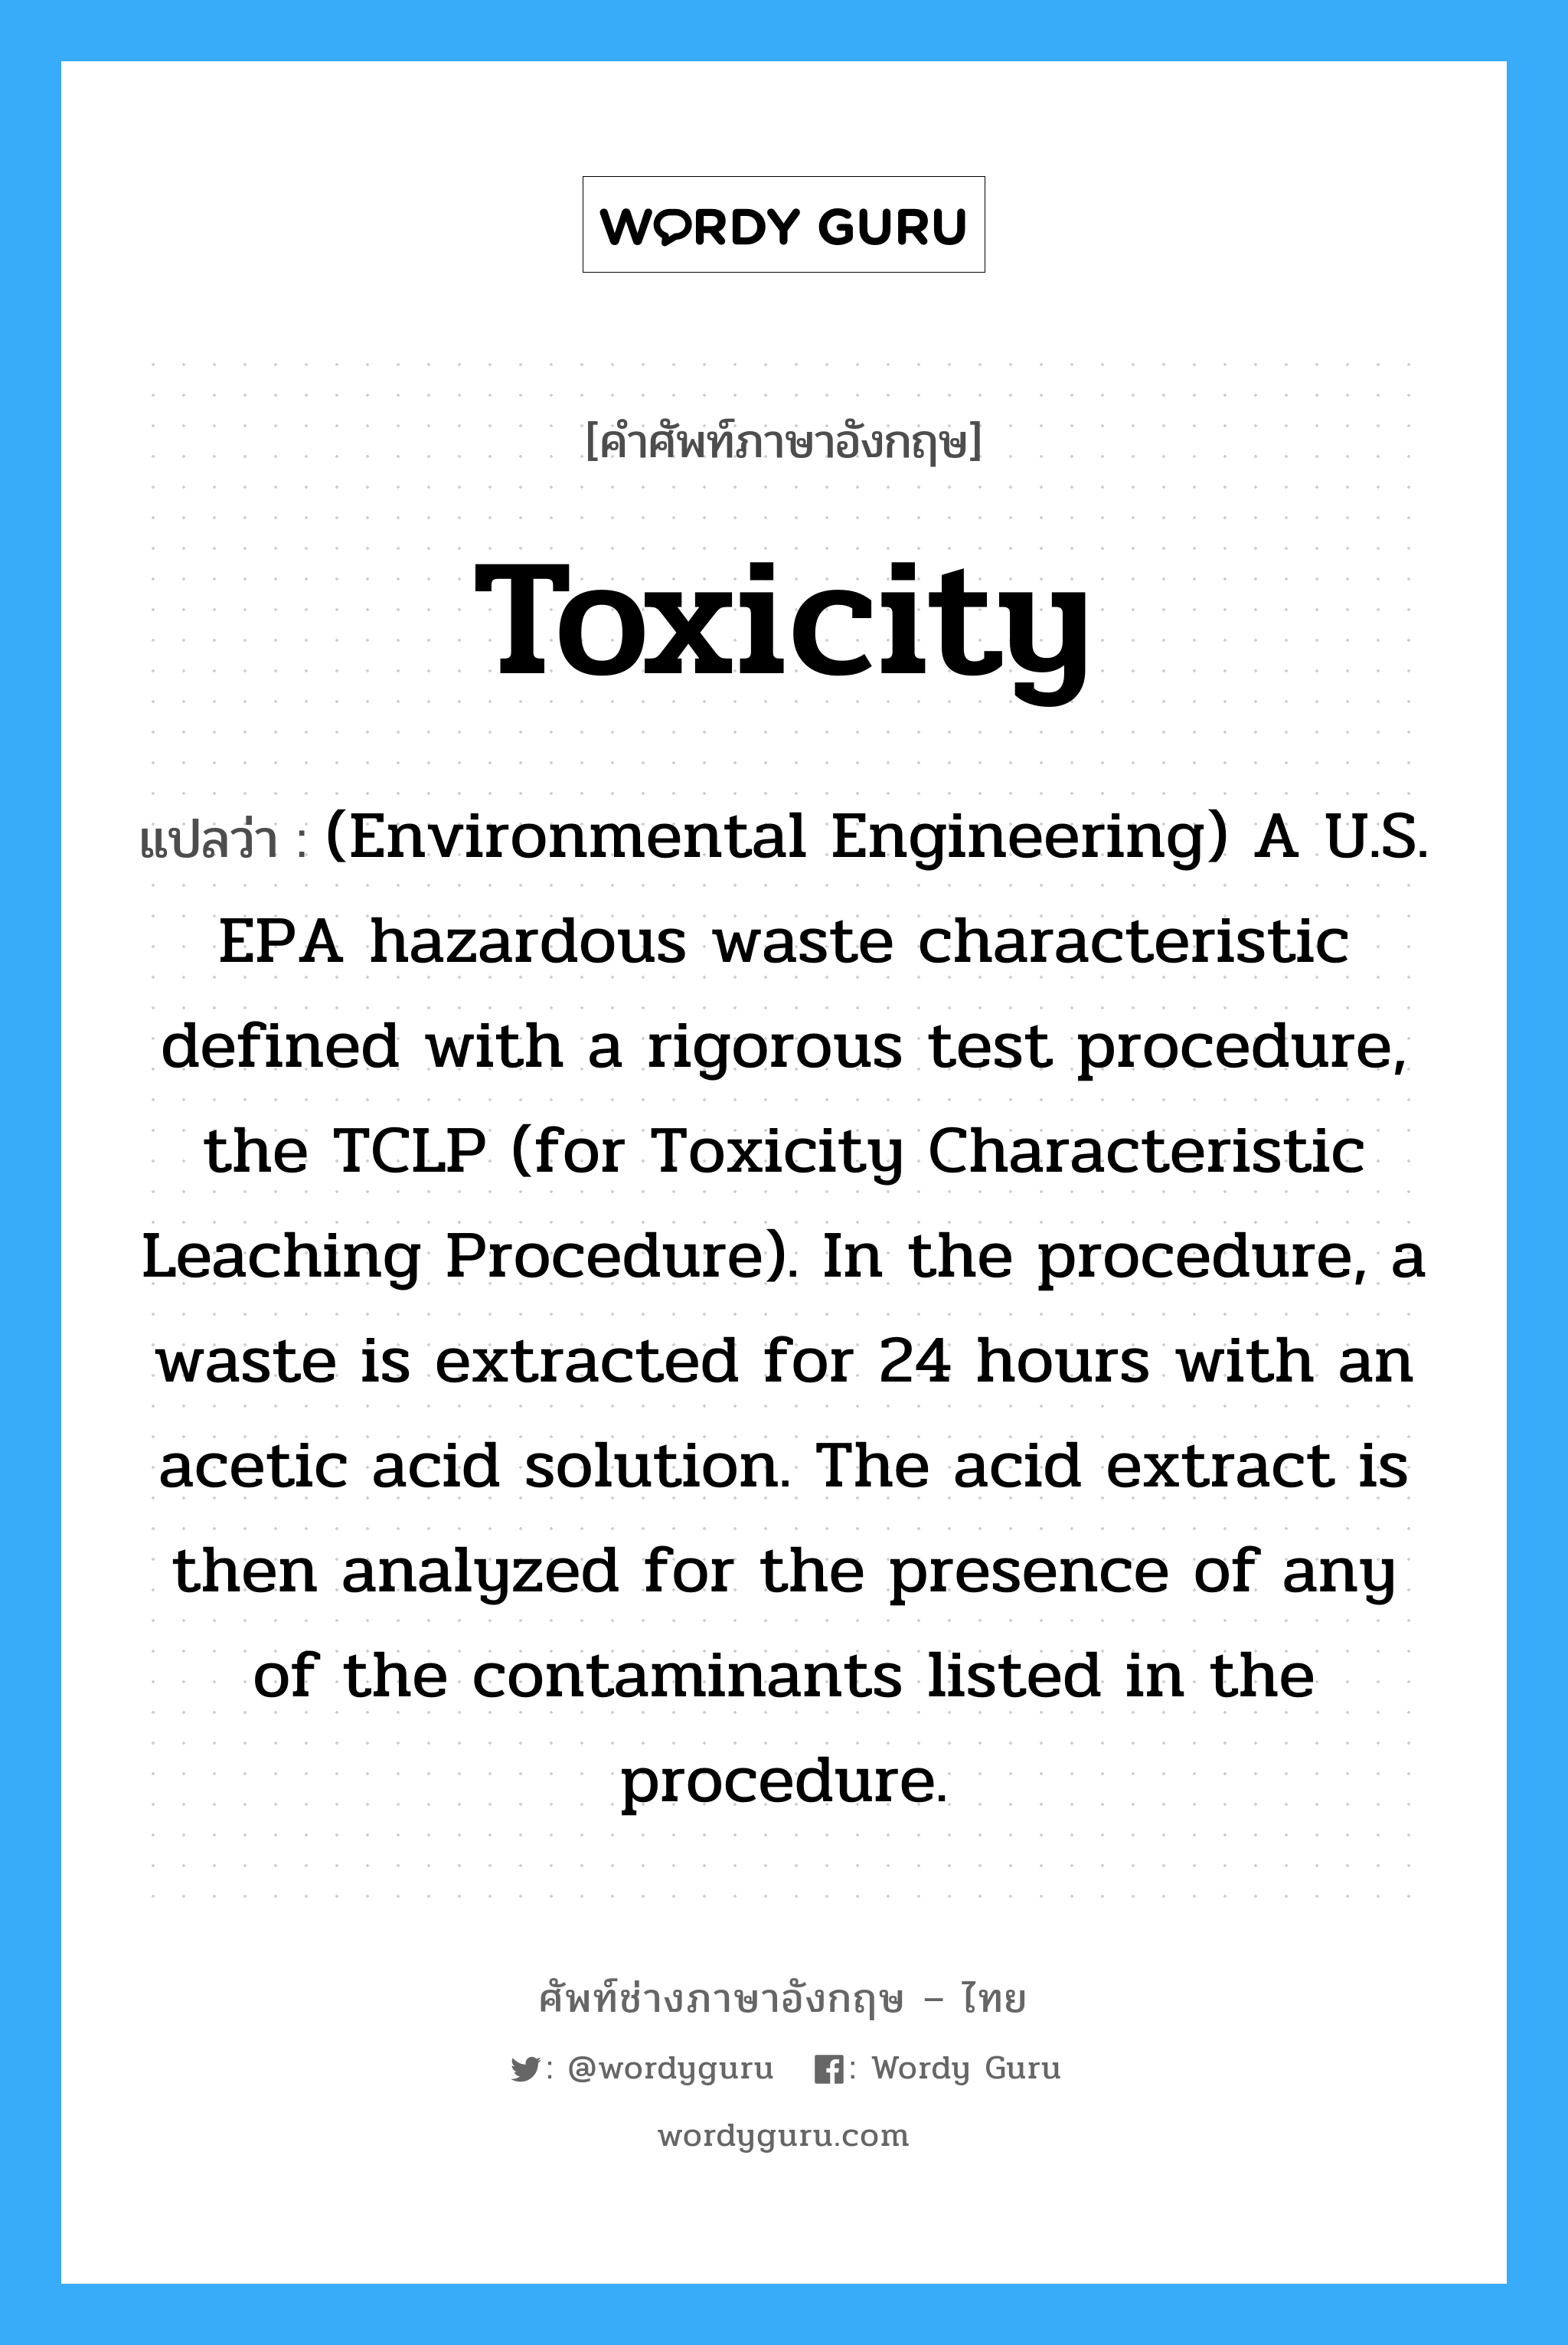 Toxicity แปลว่า?, คำศัพท์ช่างภาษาอังกฤษ - ไทย Toxicity คำศัพท์ภาษาอังกฤษ Toxicity แปลว่า (Environmental Engineering) A U.S. EPA hazardous waste characteristic defined with a rigorous test procedure, the TCLP (for Toxicity Characteristic Leaching Procedure). In the procedure, a waste is extracted for 24 hours with an acetic acid solution. The acid extract is then analyzed for the presence of any of the contaminants listed in the procedure.